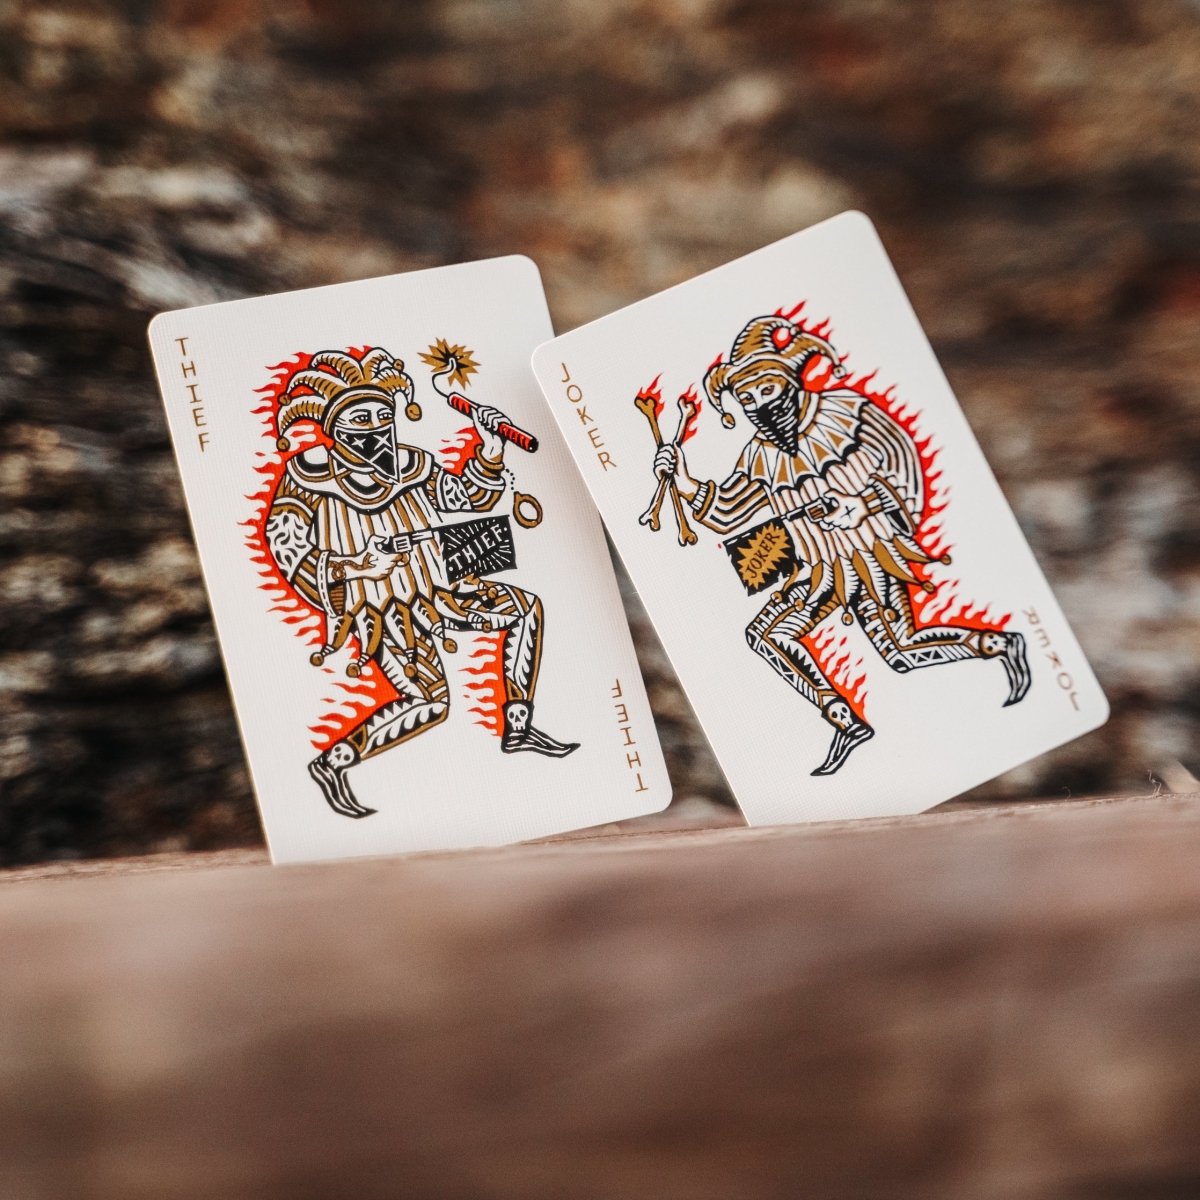 Dystopia Playing Cards - Joker and the Thief - Playing Cards